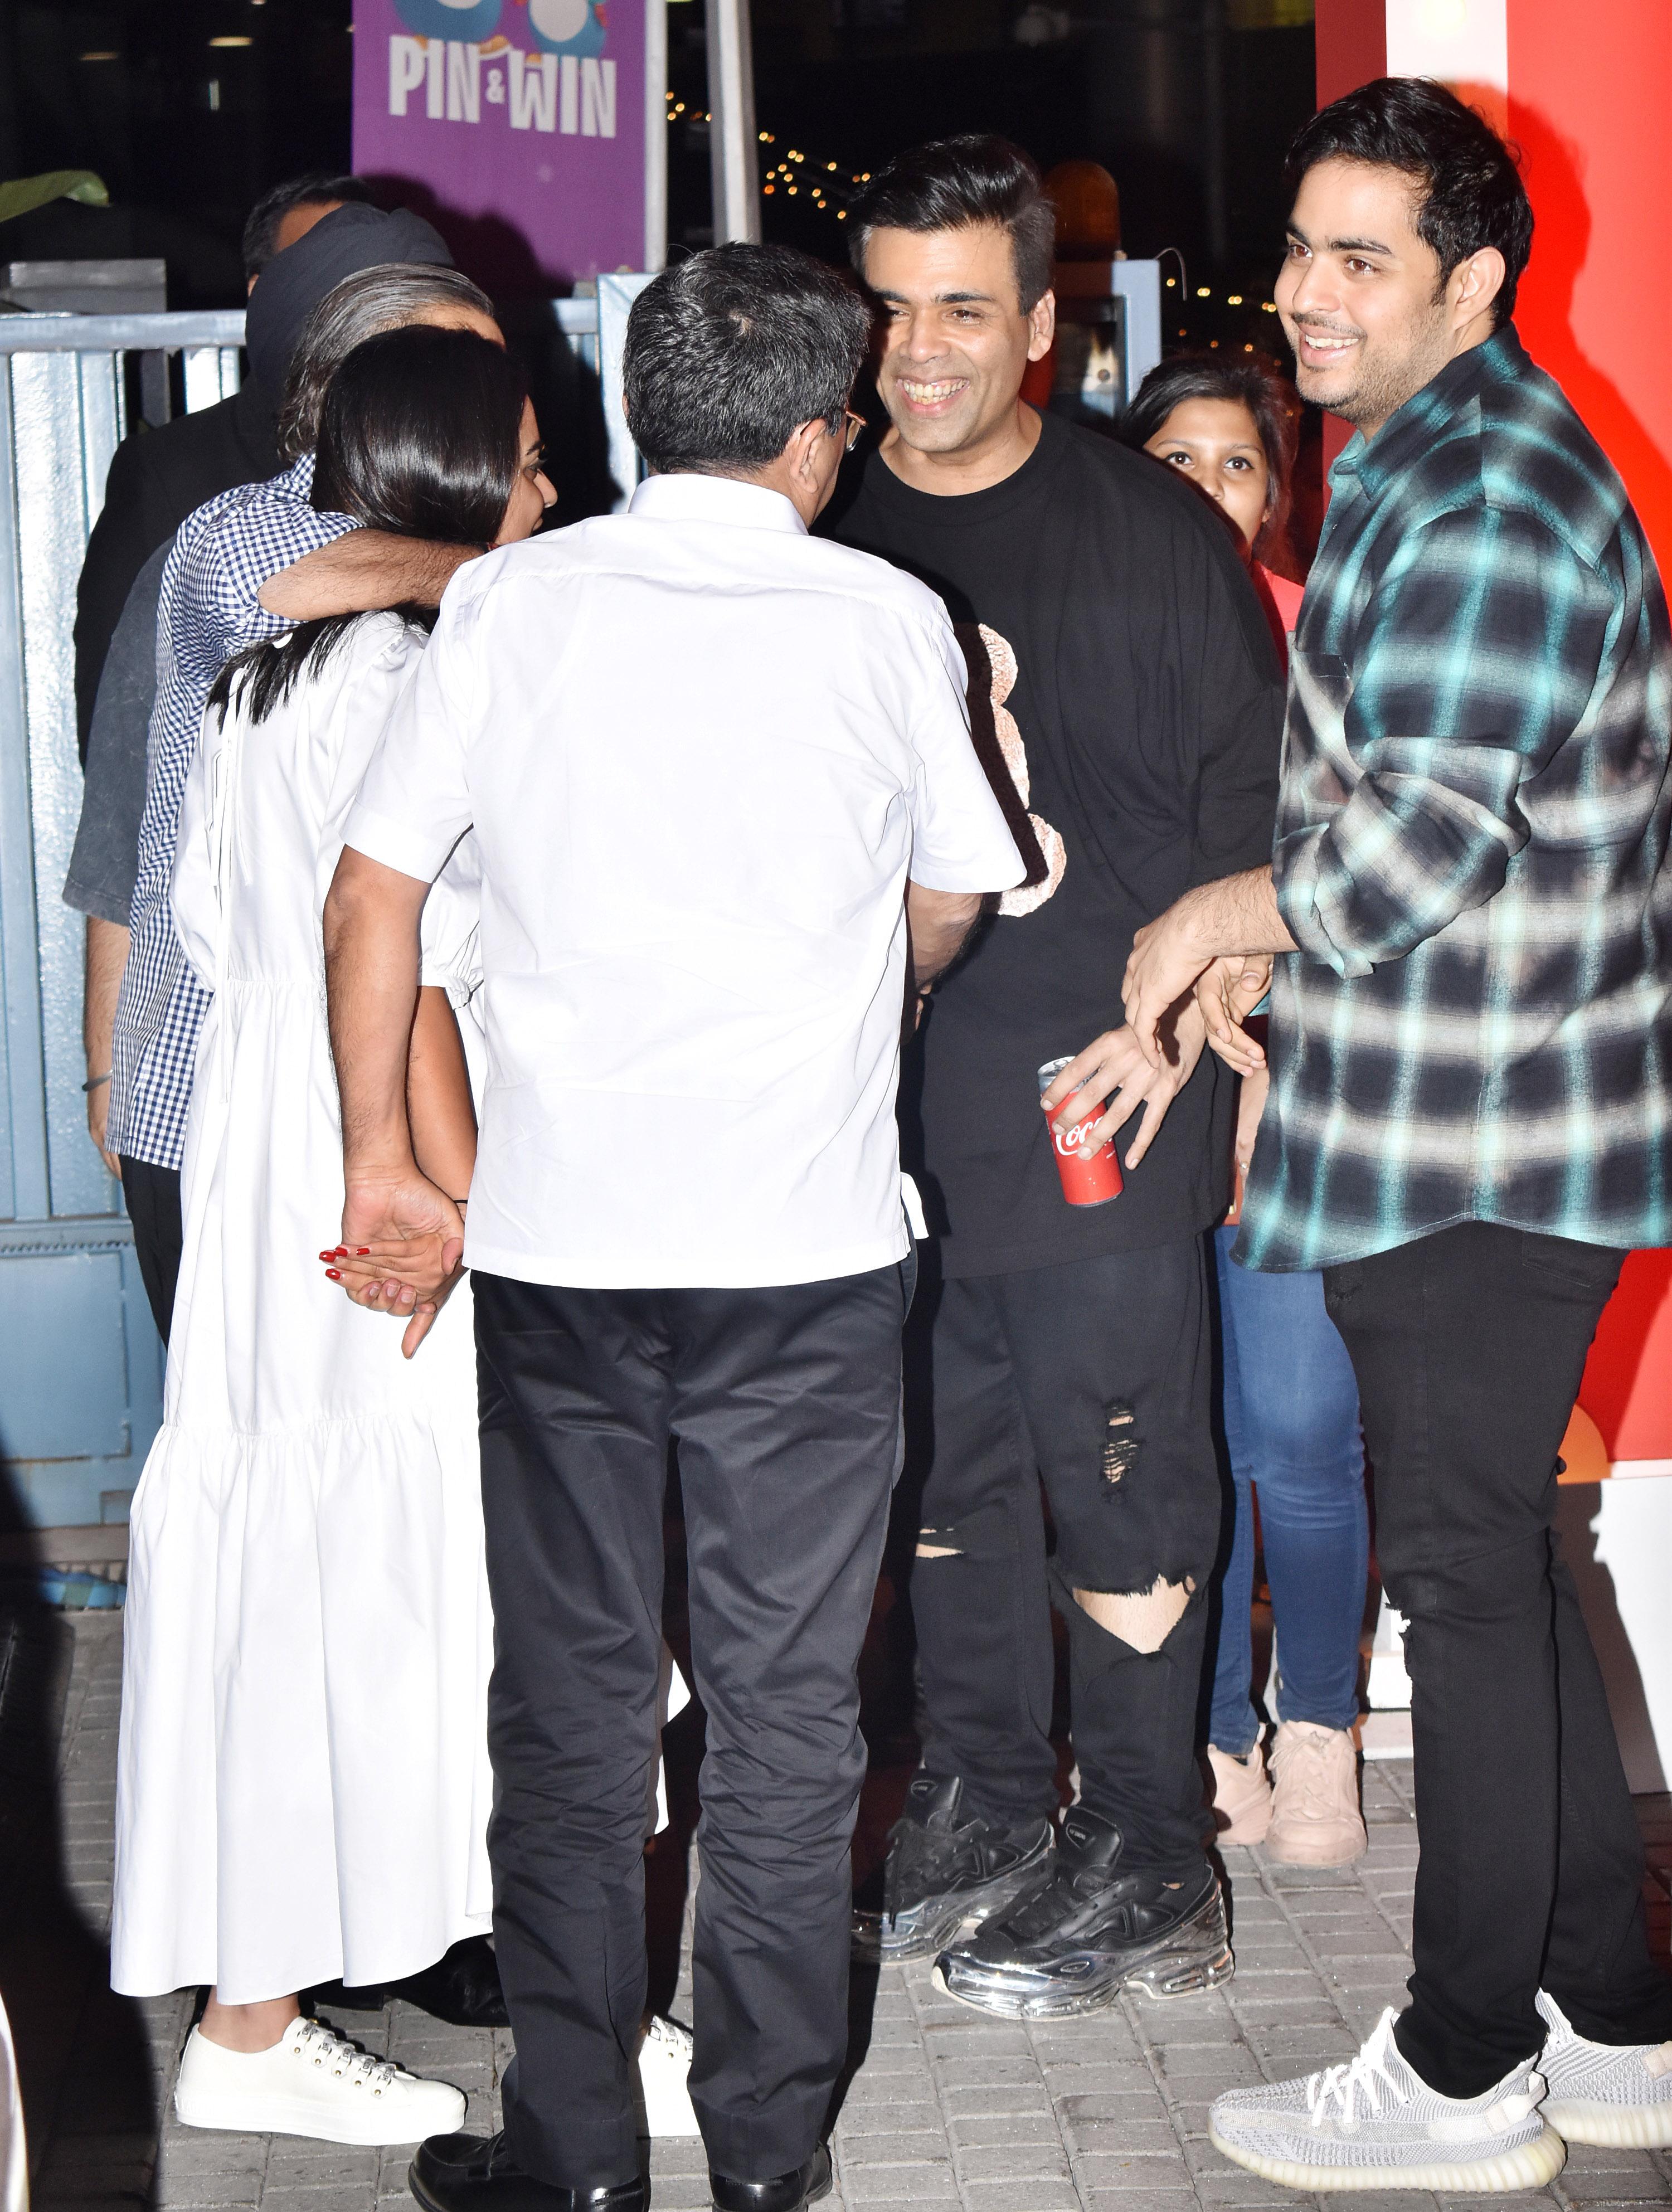 In photo: Karan Johar shares a hearty laugh with Mukesh, Akash and Isha Ambani after the event in BKC